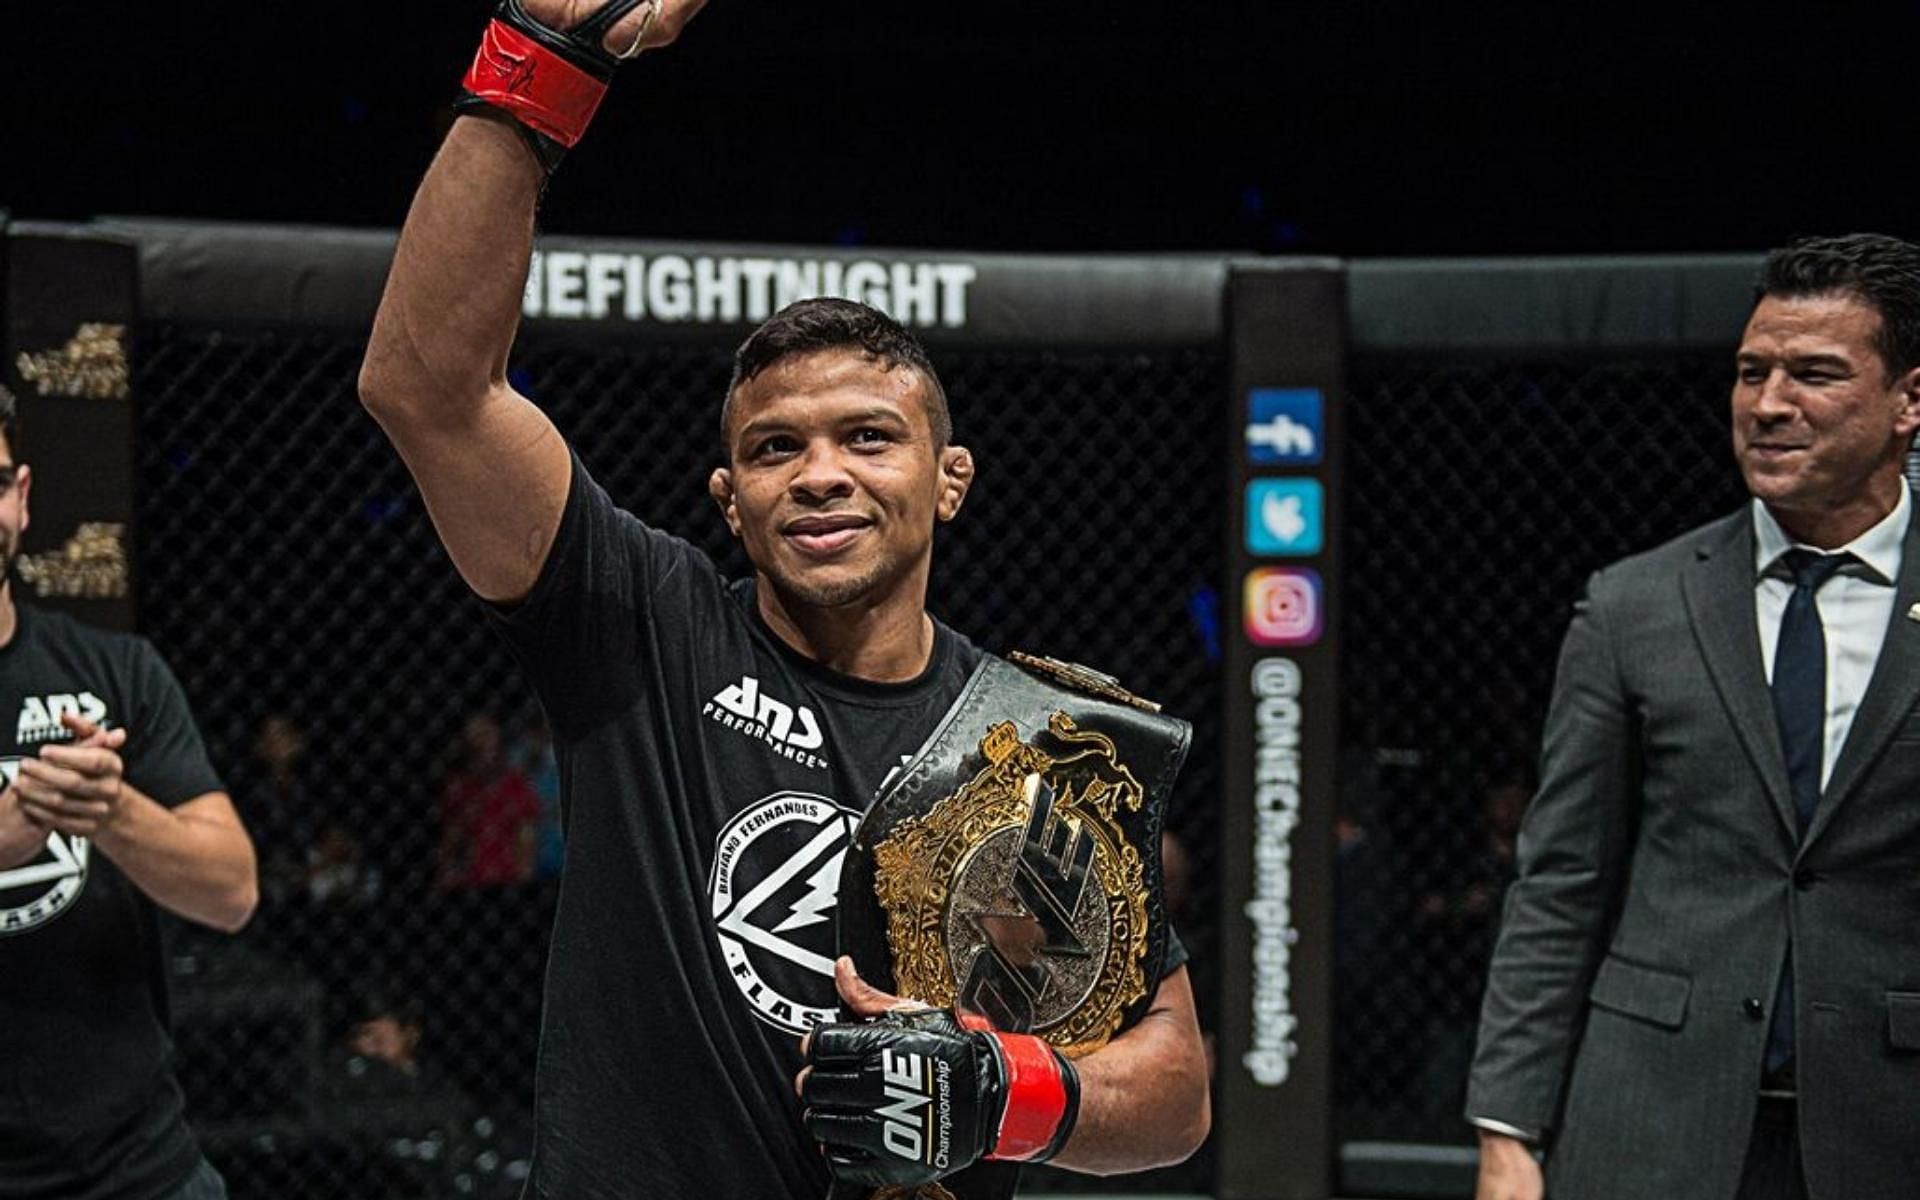 ONE bantamweight champion Bibiano Fernandes has been the most dominant champion the company has ever had. (Image courtesy of ONE Championship)